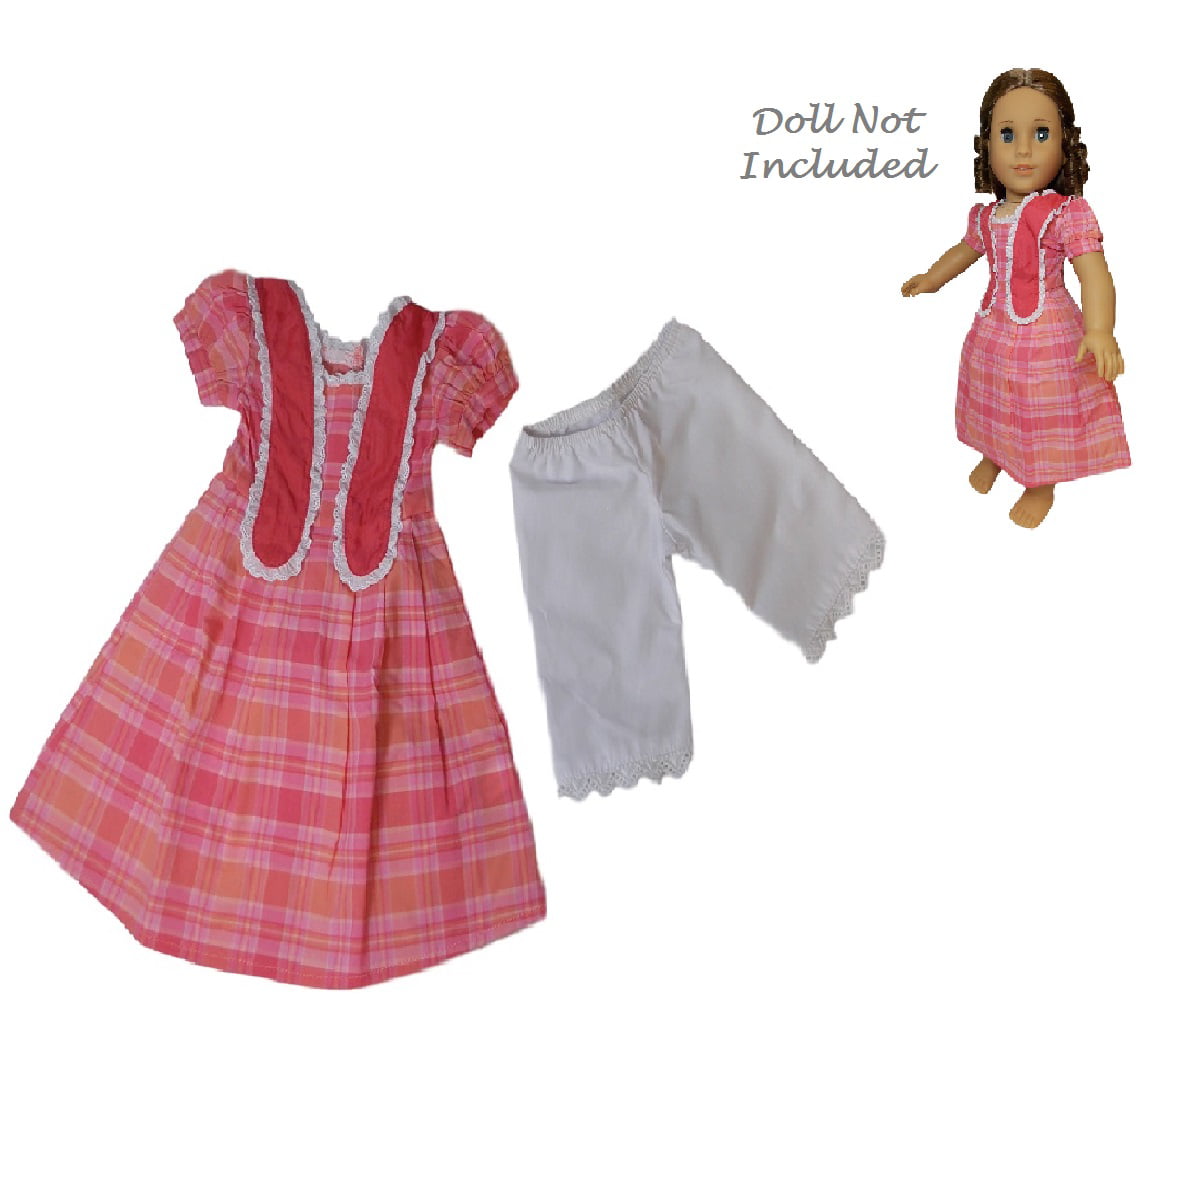 American Girl Doll Marie Grace Clothes Meet Outfit Dress Pantaloons Pink for sale online 